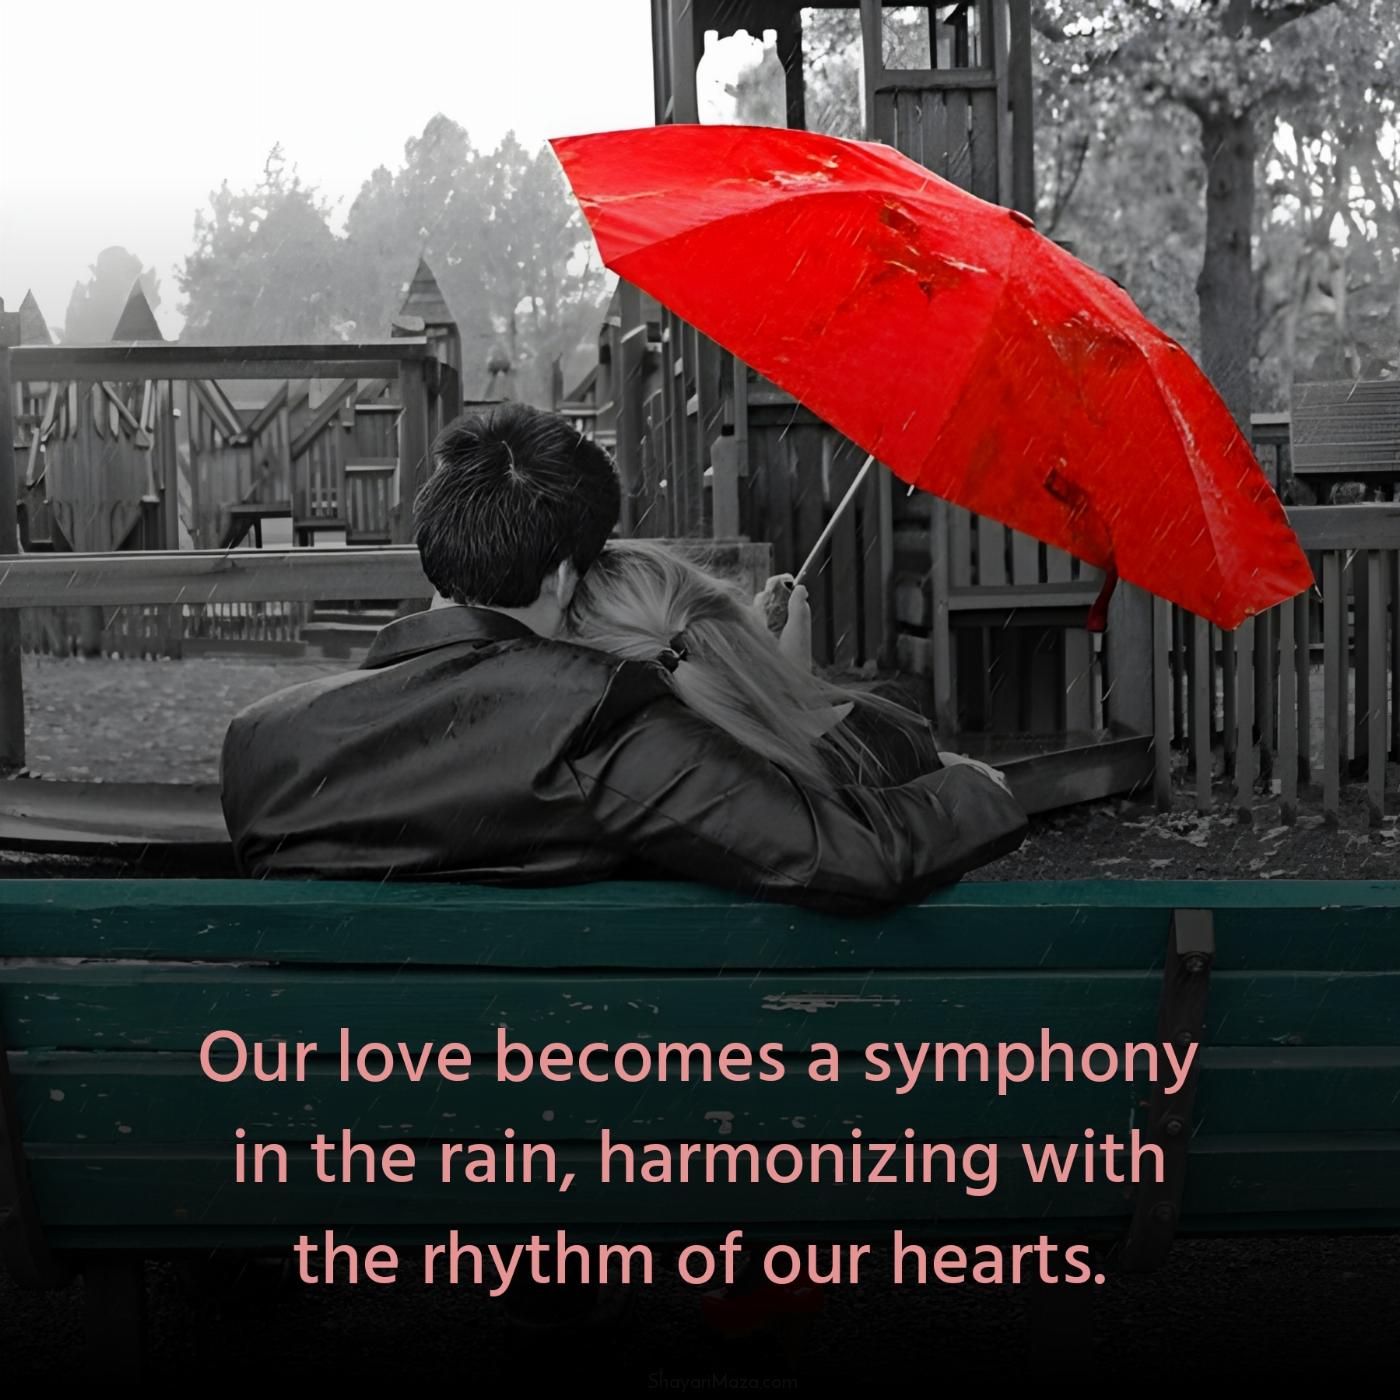 Our love becomes a symphony in the rain harmonizing with the rhythm